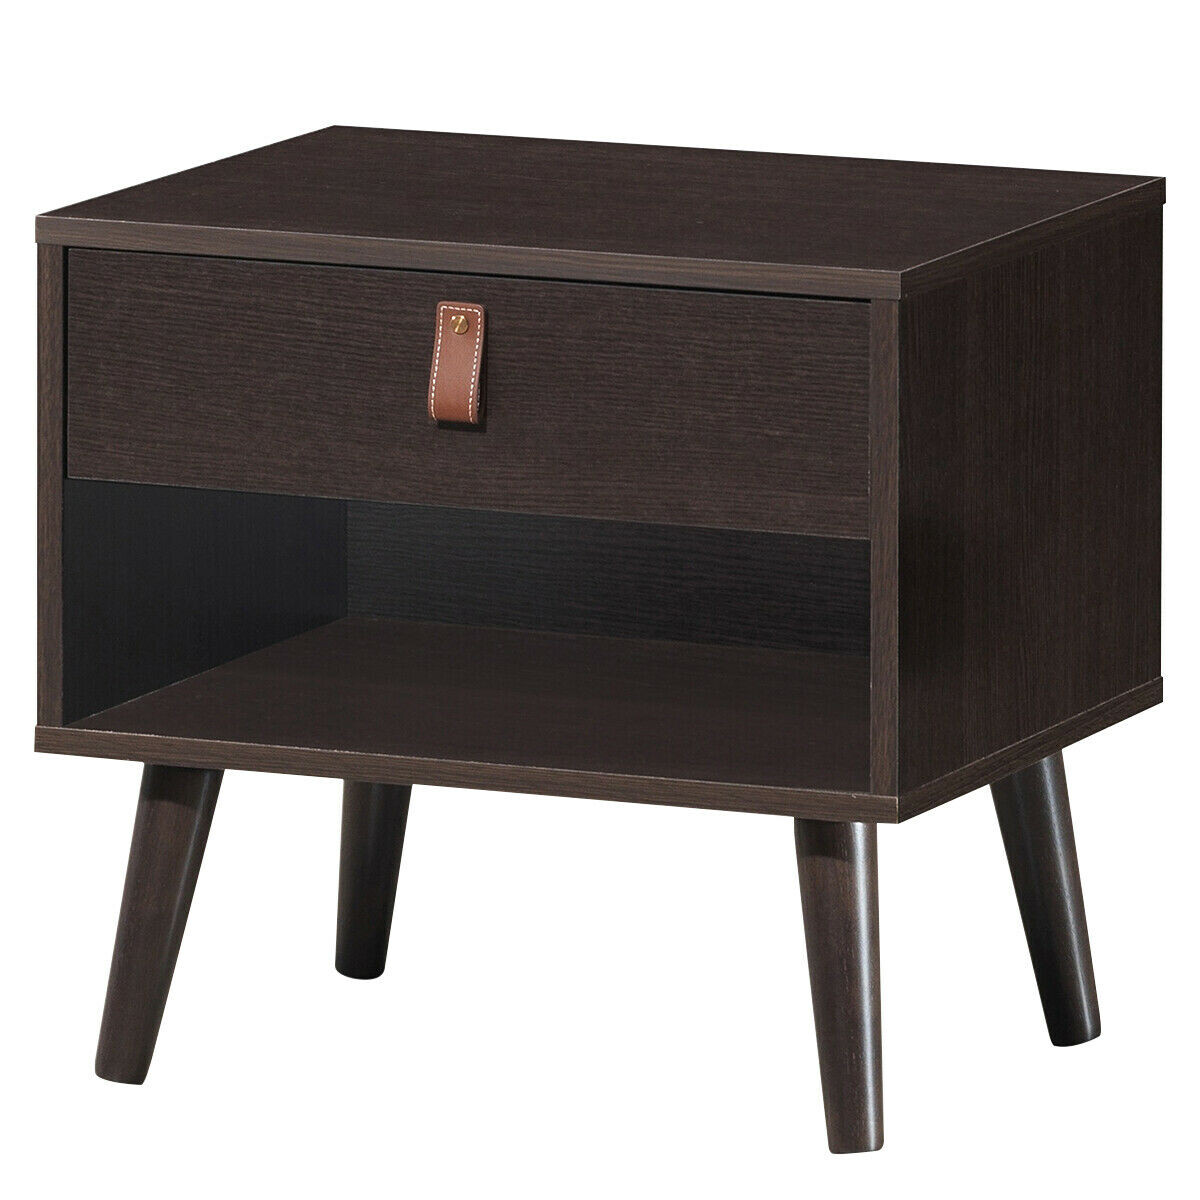 Nightstand Bedroom Table with Drawer Storage Shelf-Brown - Color: Brown